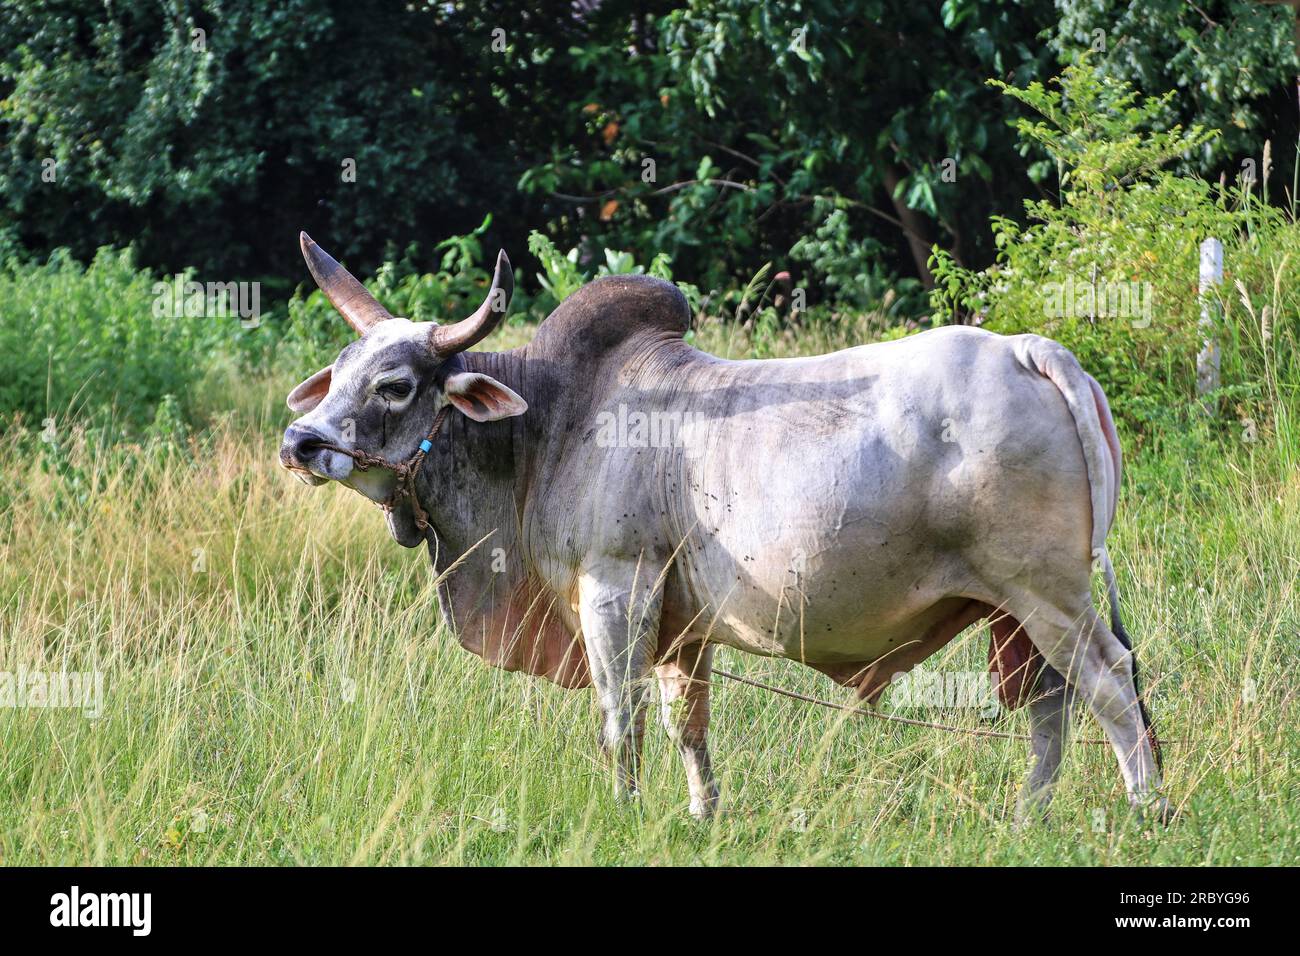 A white bull with large curved horns on its head. standing still in the grass Stock Photo